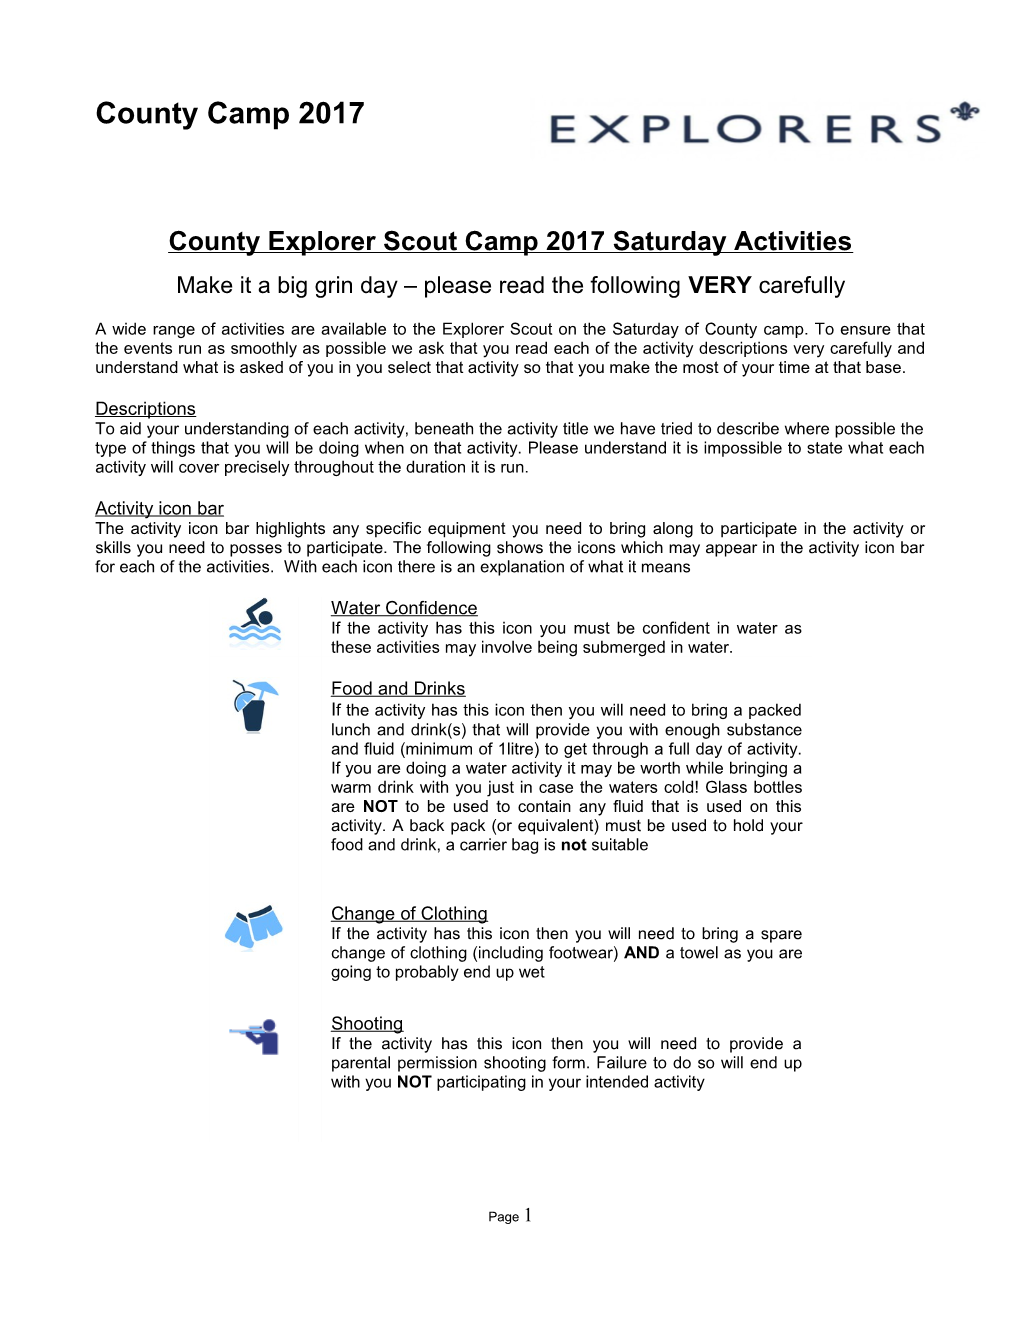 County Explorer Scout Camp 2017 Saturday Activities